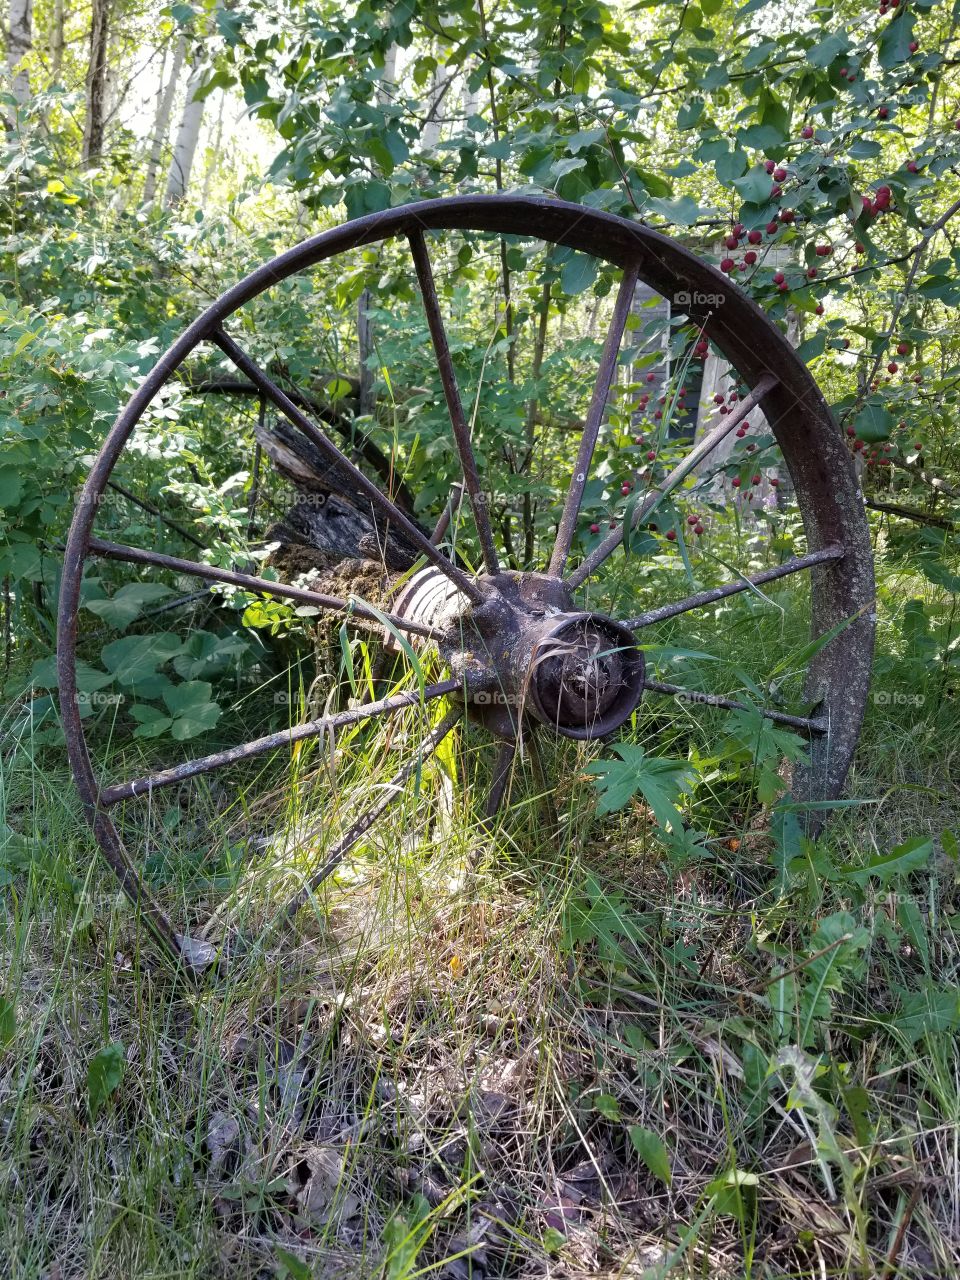 Of abandoned farm machinery found on the prairies.